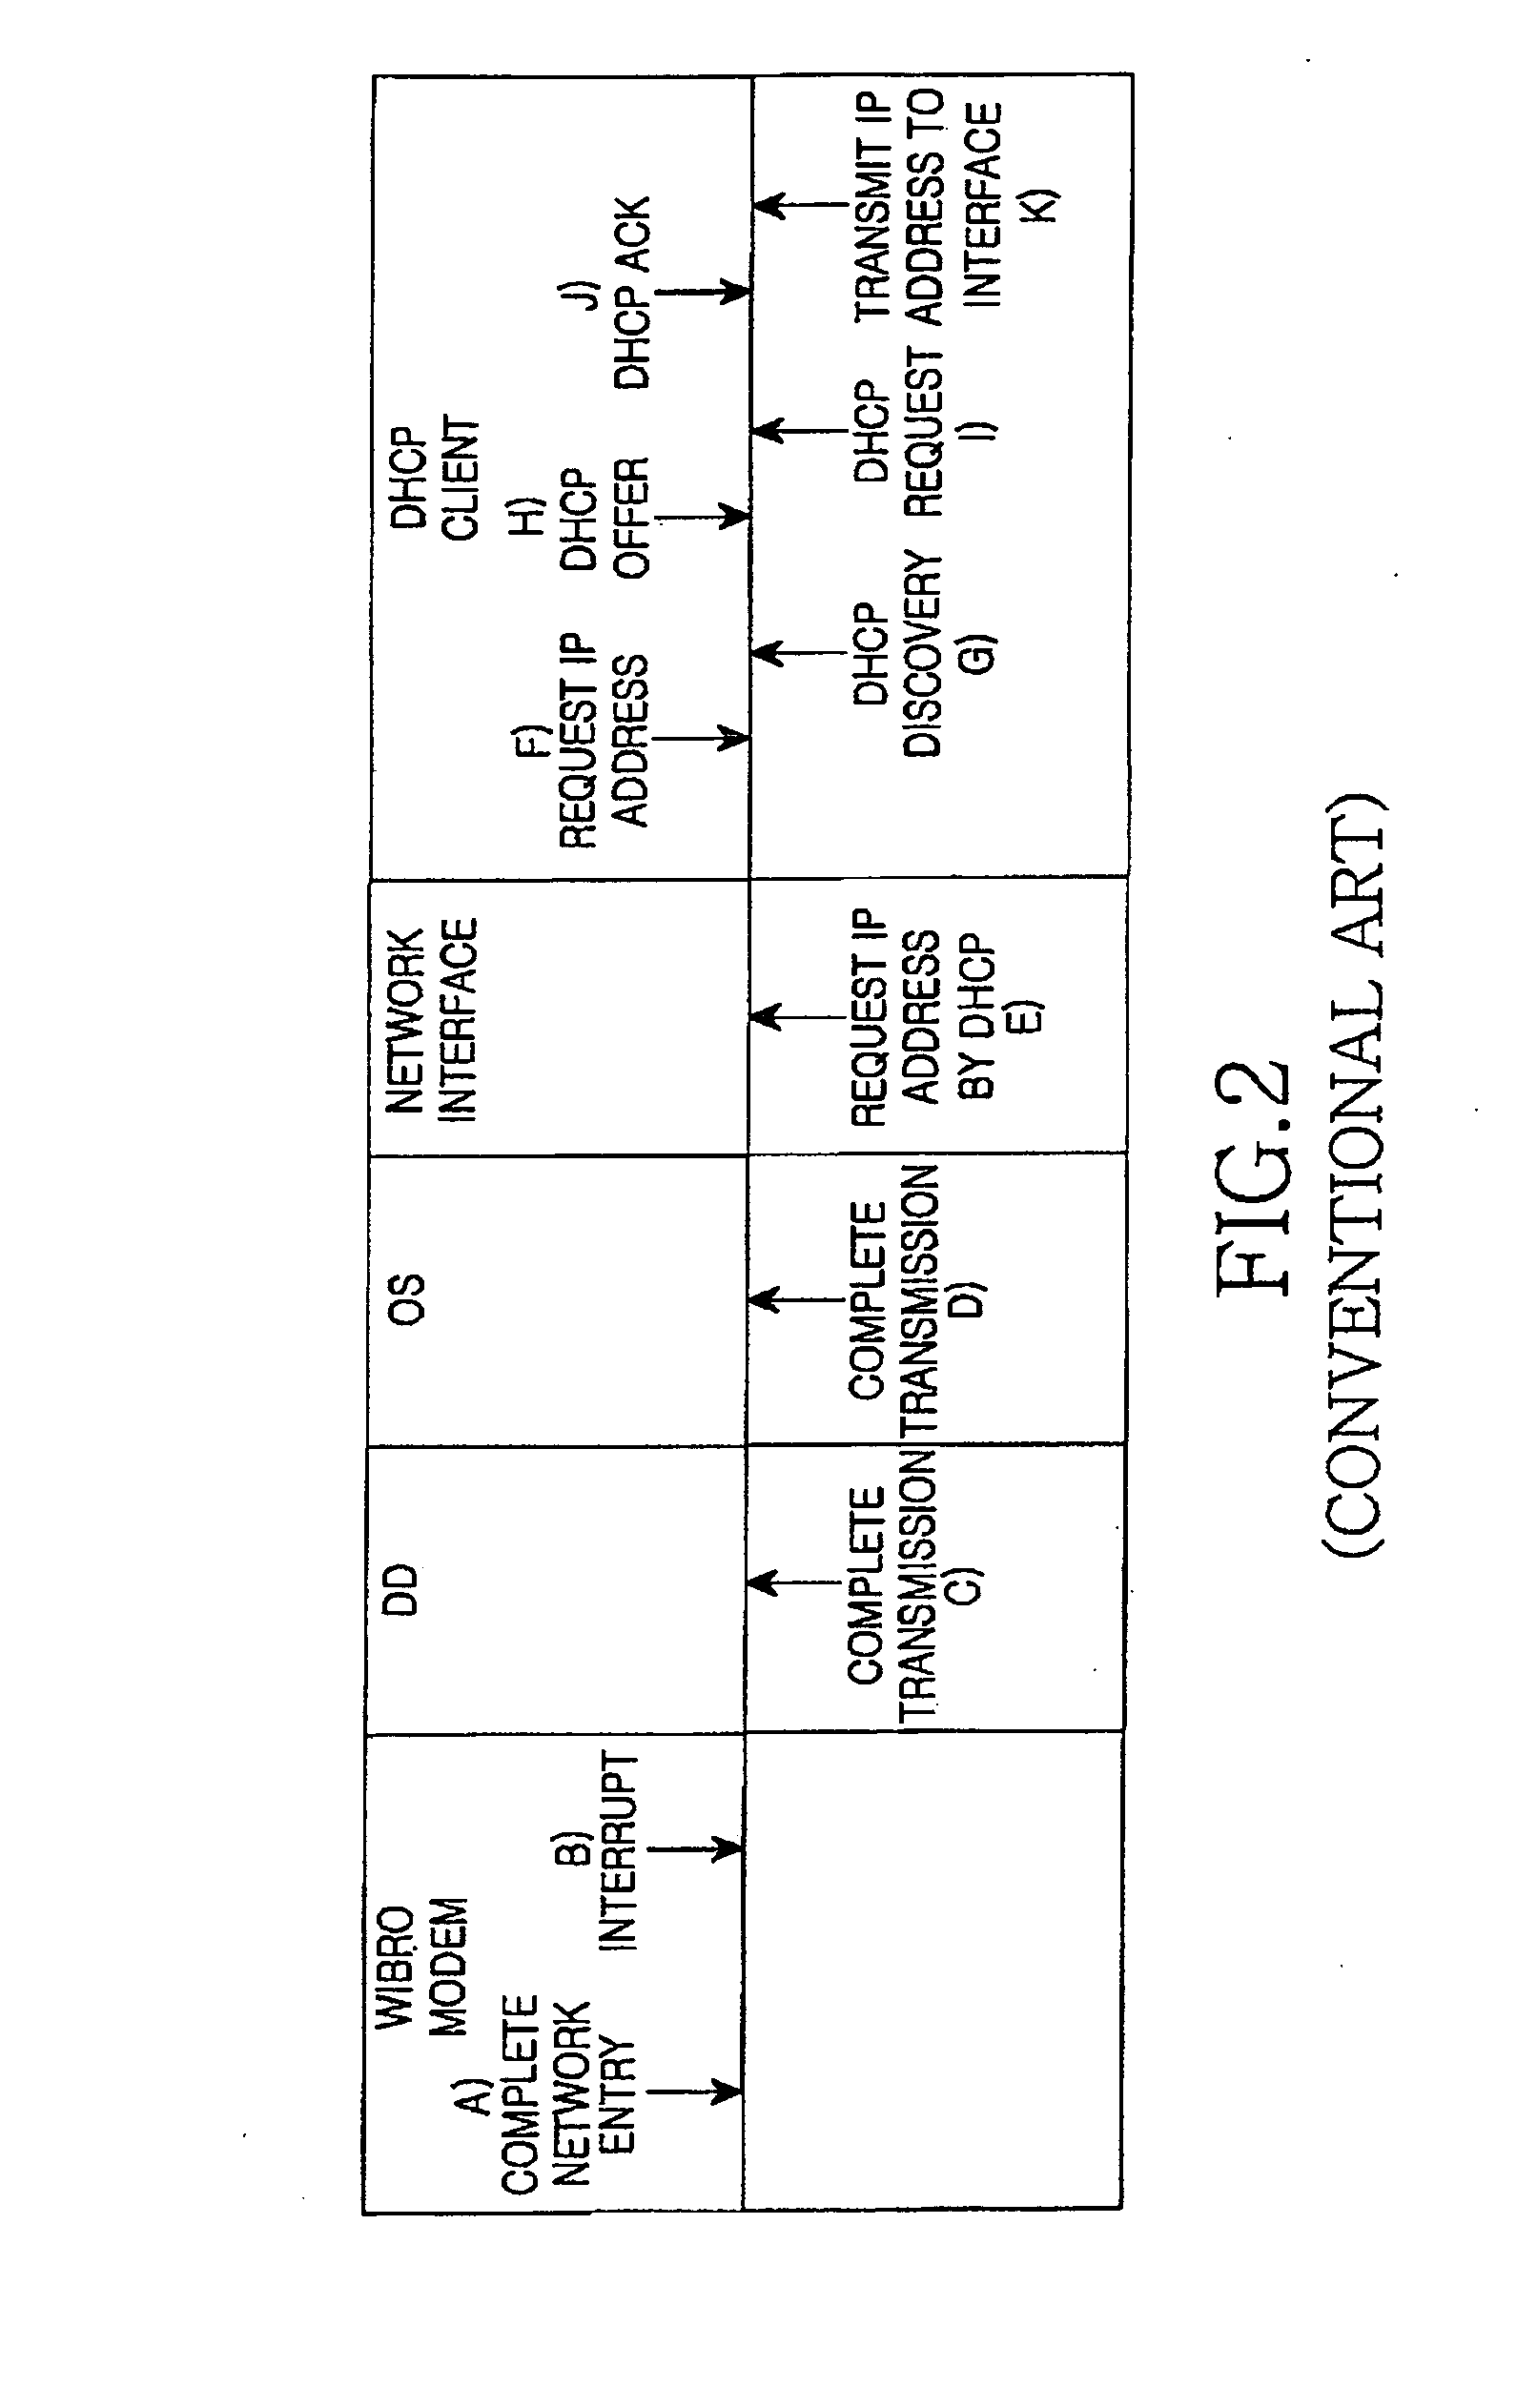 Apparatus and method for allocating network address